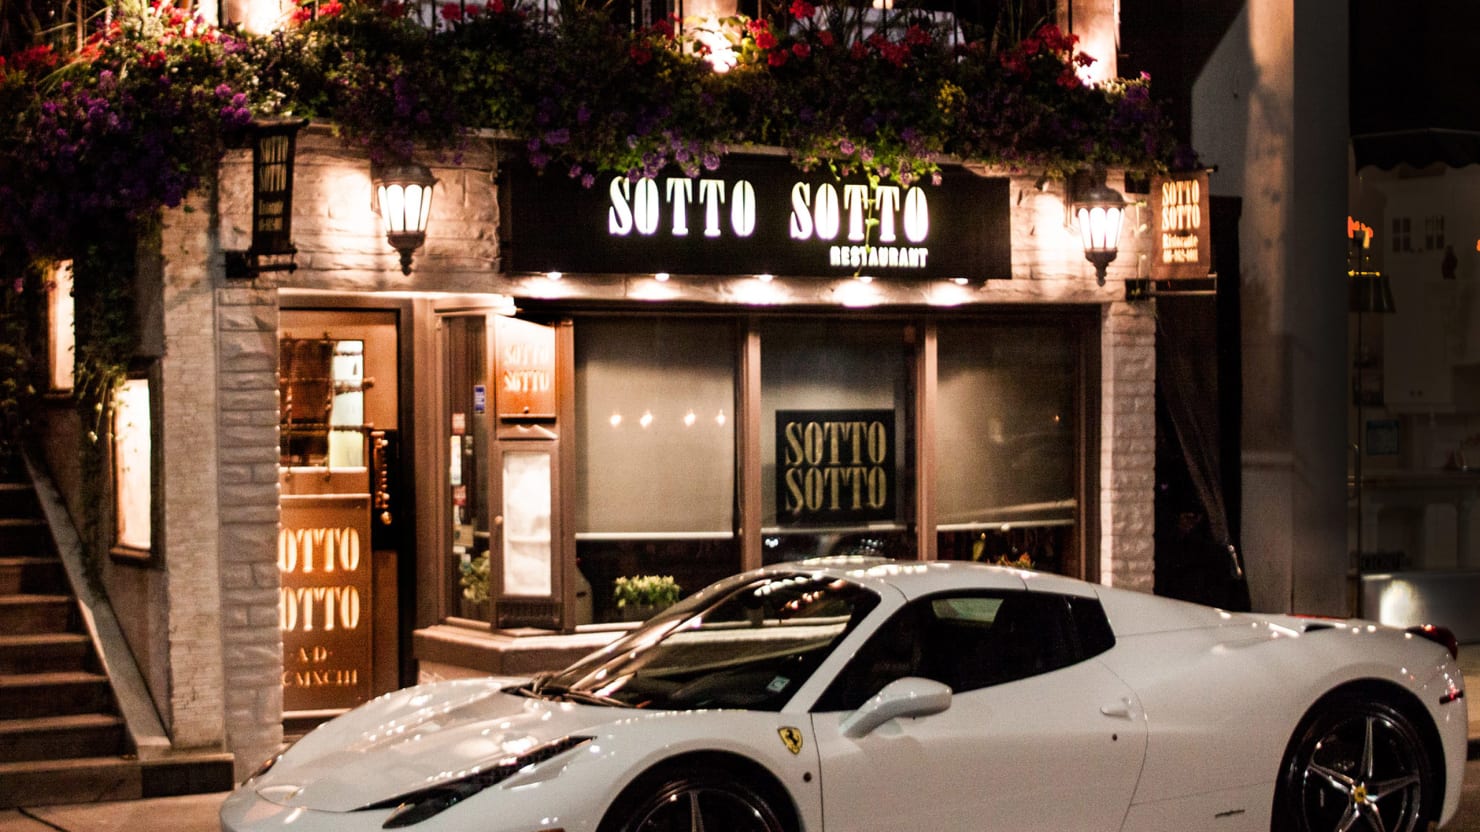 The Fiery Death of Sotto Sotto, Toronto’s Celebrity Hotspot1480 x 832